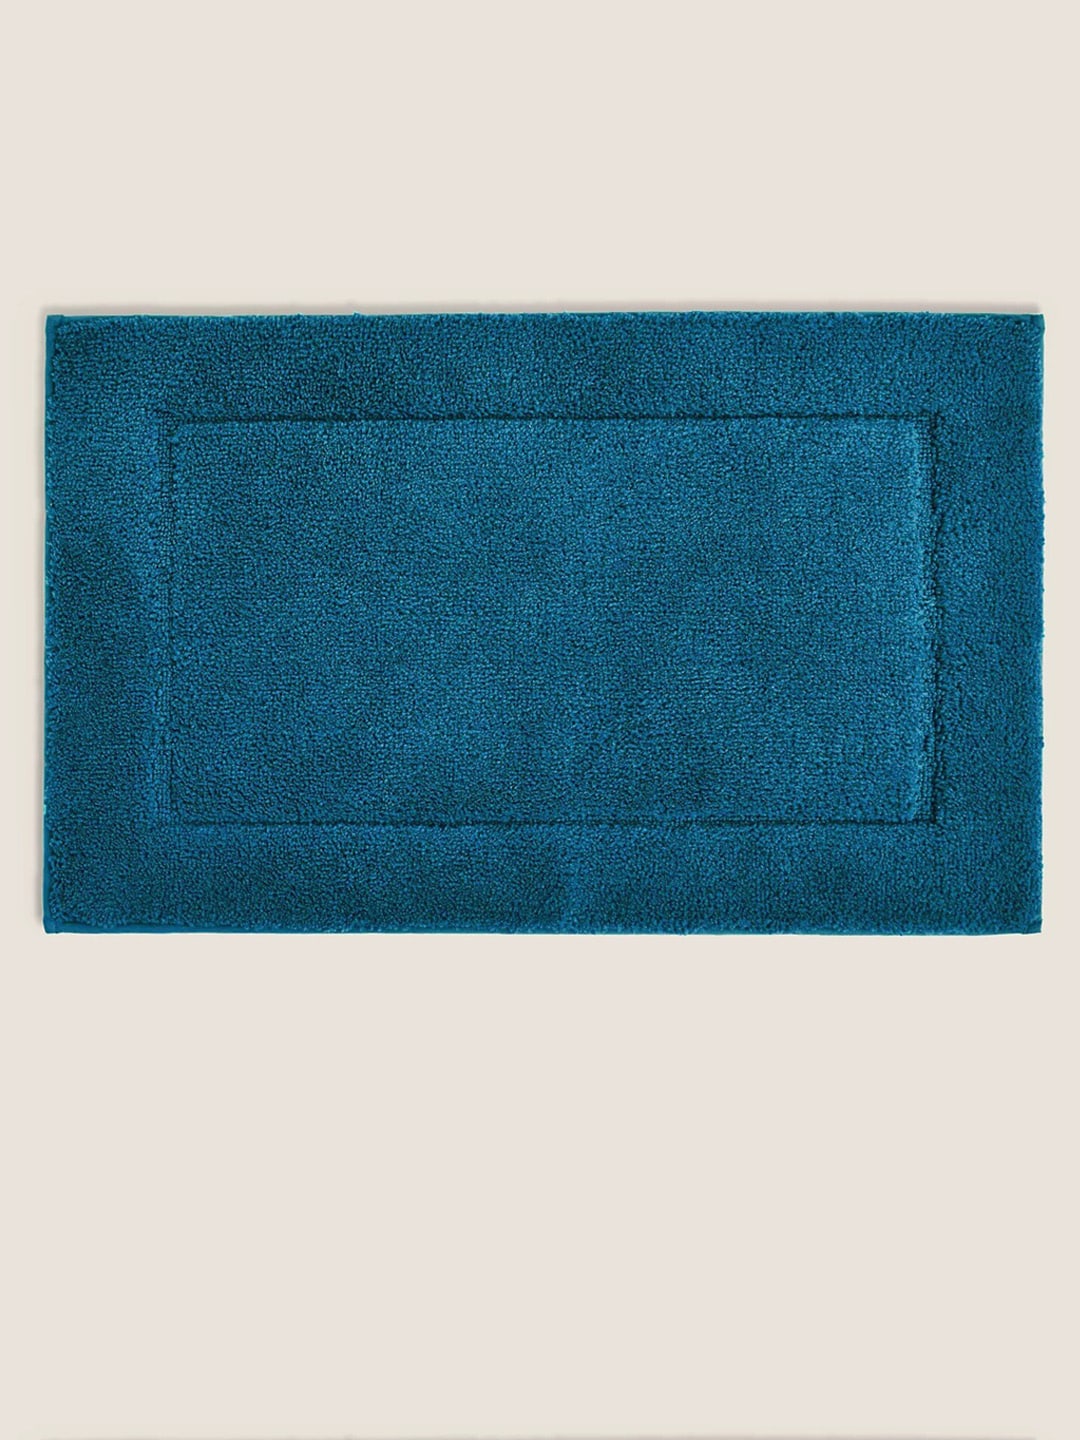 Marks & Spencer Teal Blue Textured Bath Rug Price in India